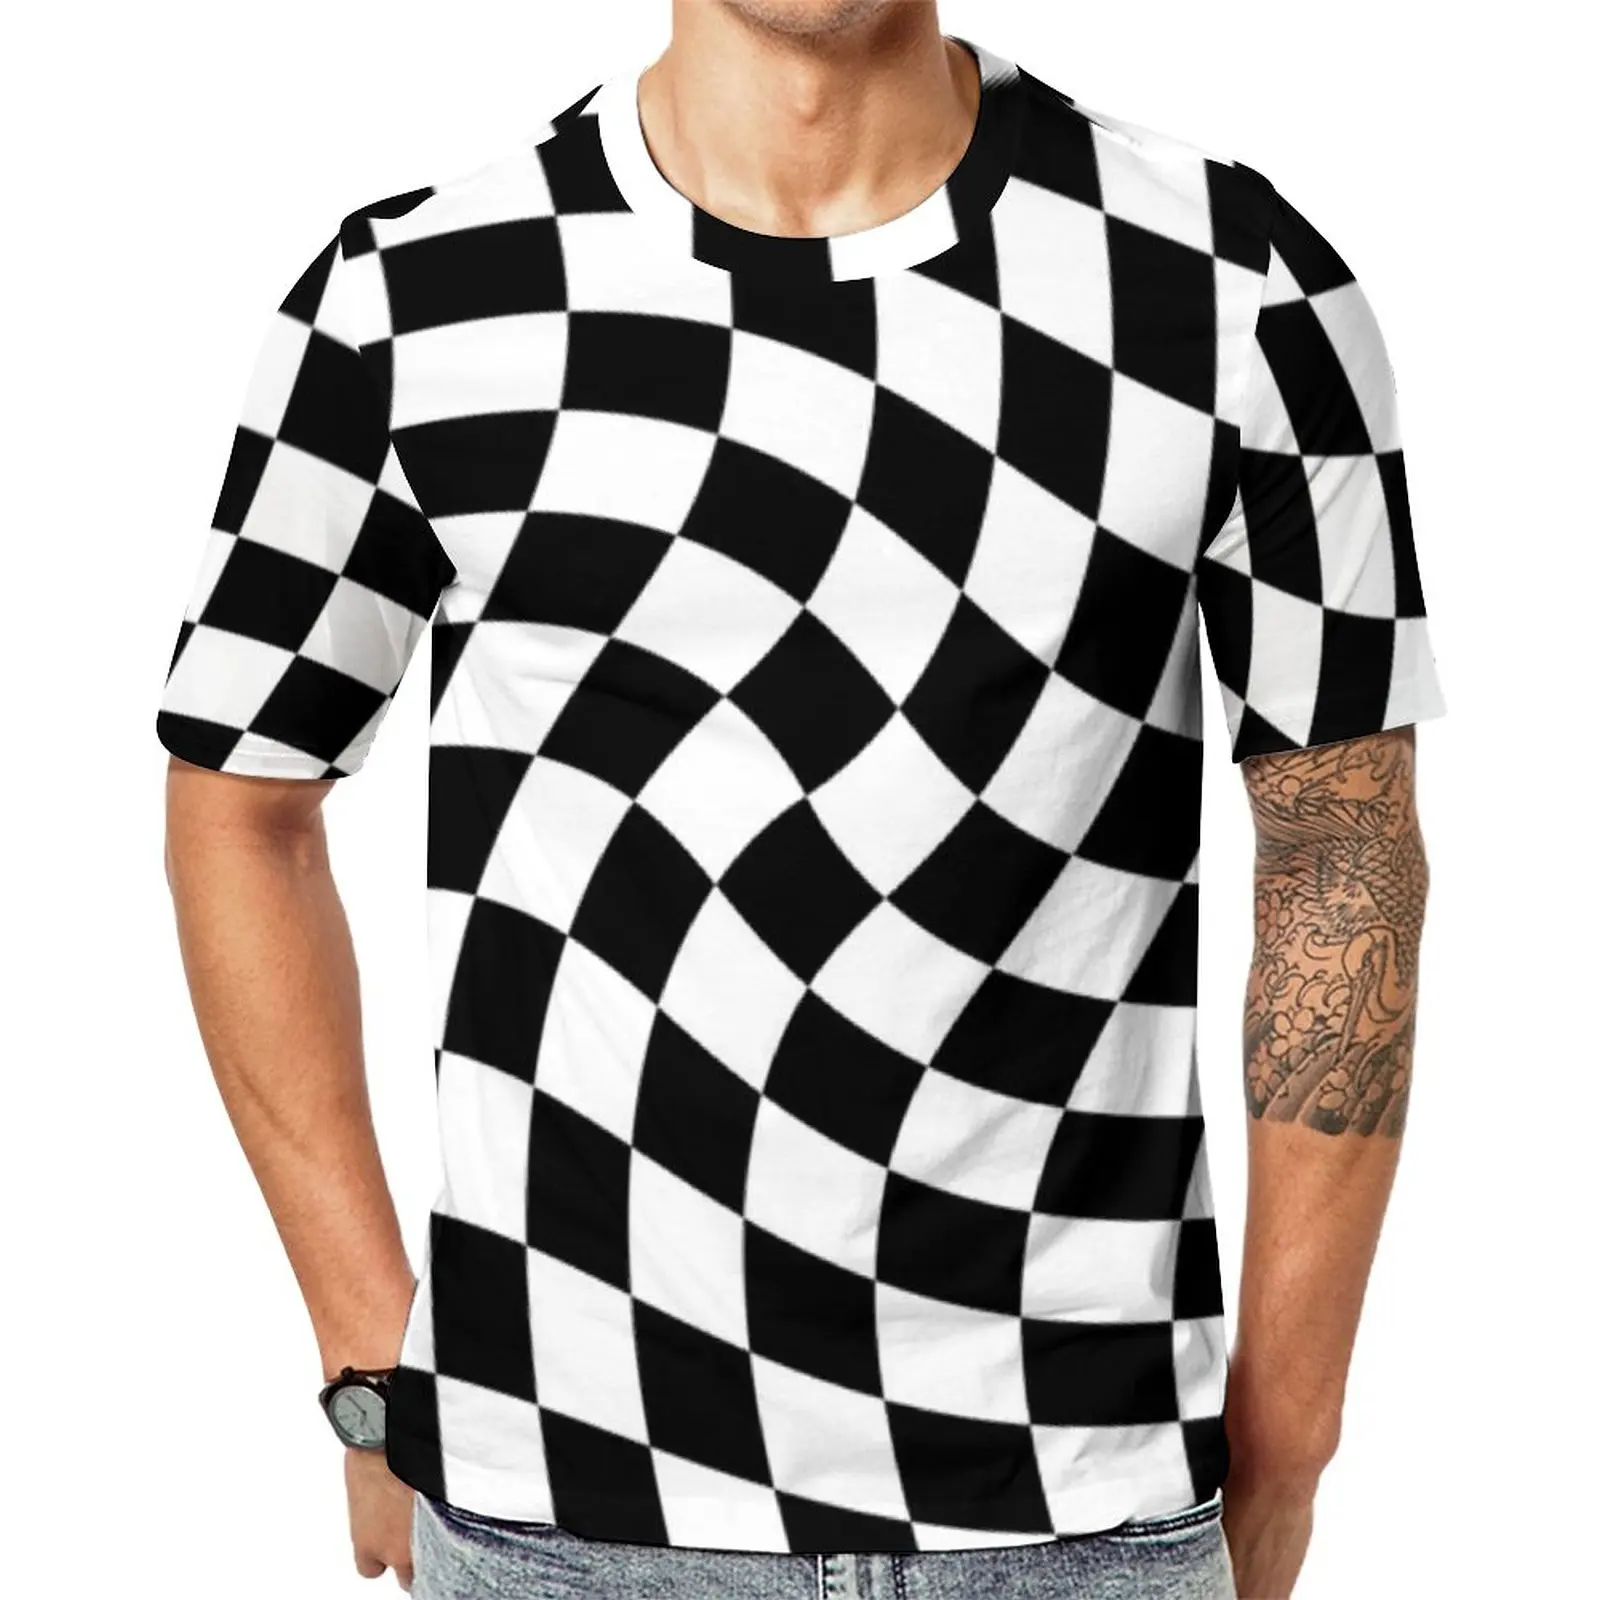 

Abstract Checkerboard T-Shirt Black and White Checker Vintage T-Shirts Couple Funny Tee Shirt Short Sleeve Design Tops 5XL 6XL